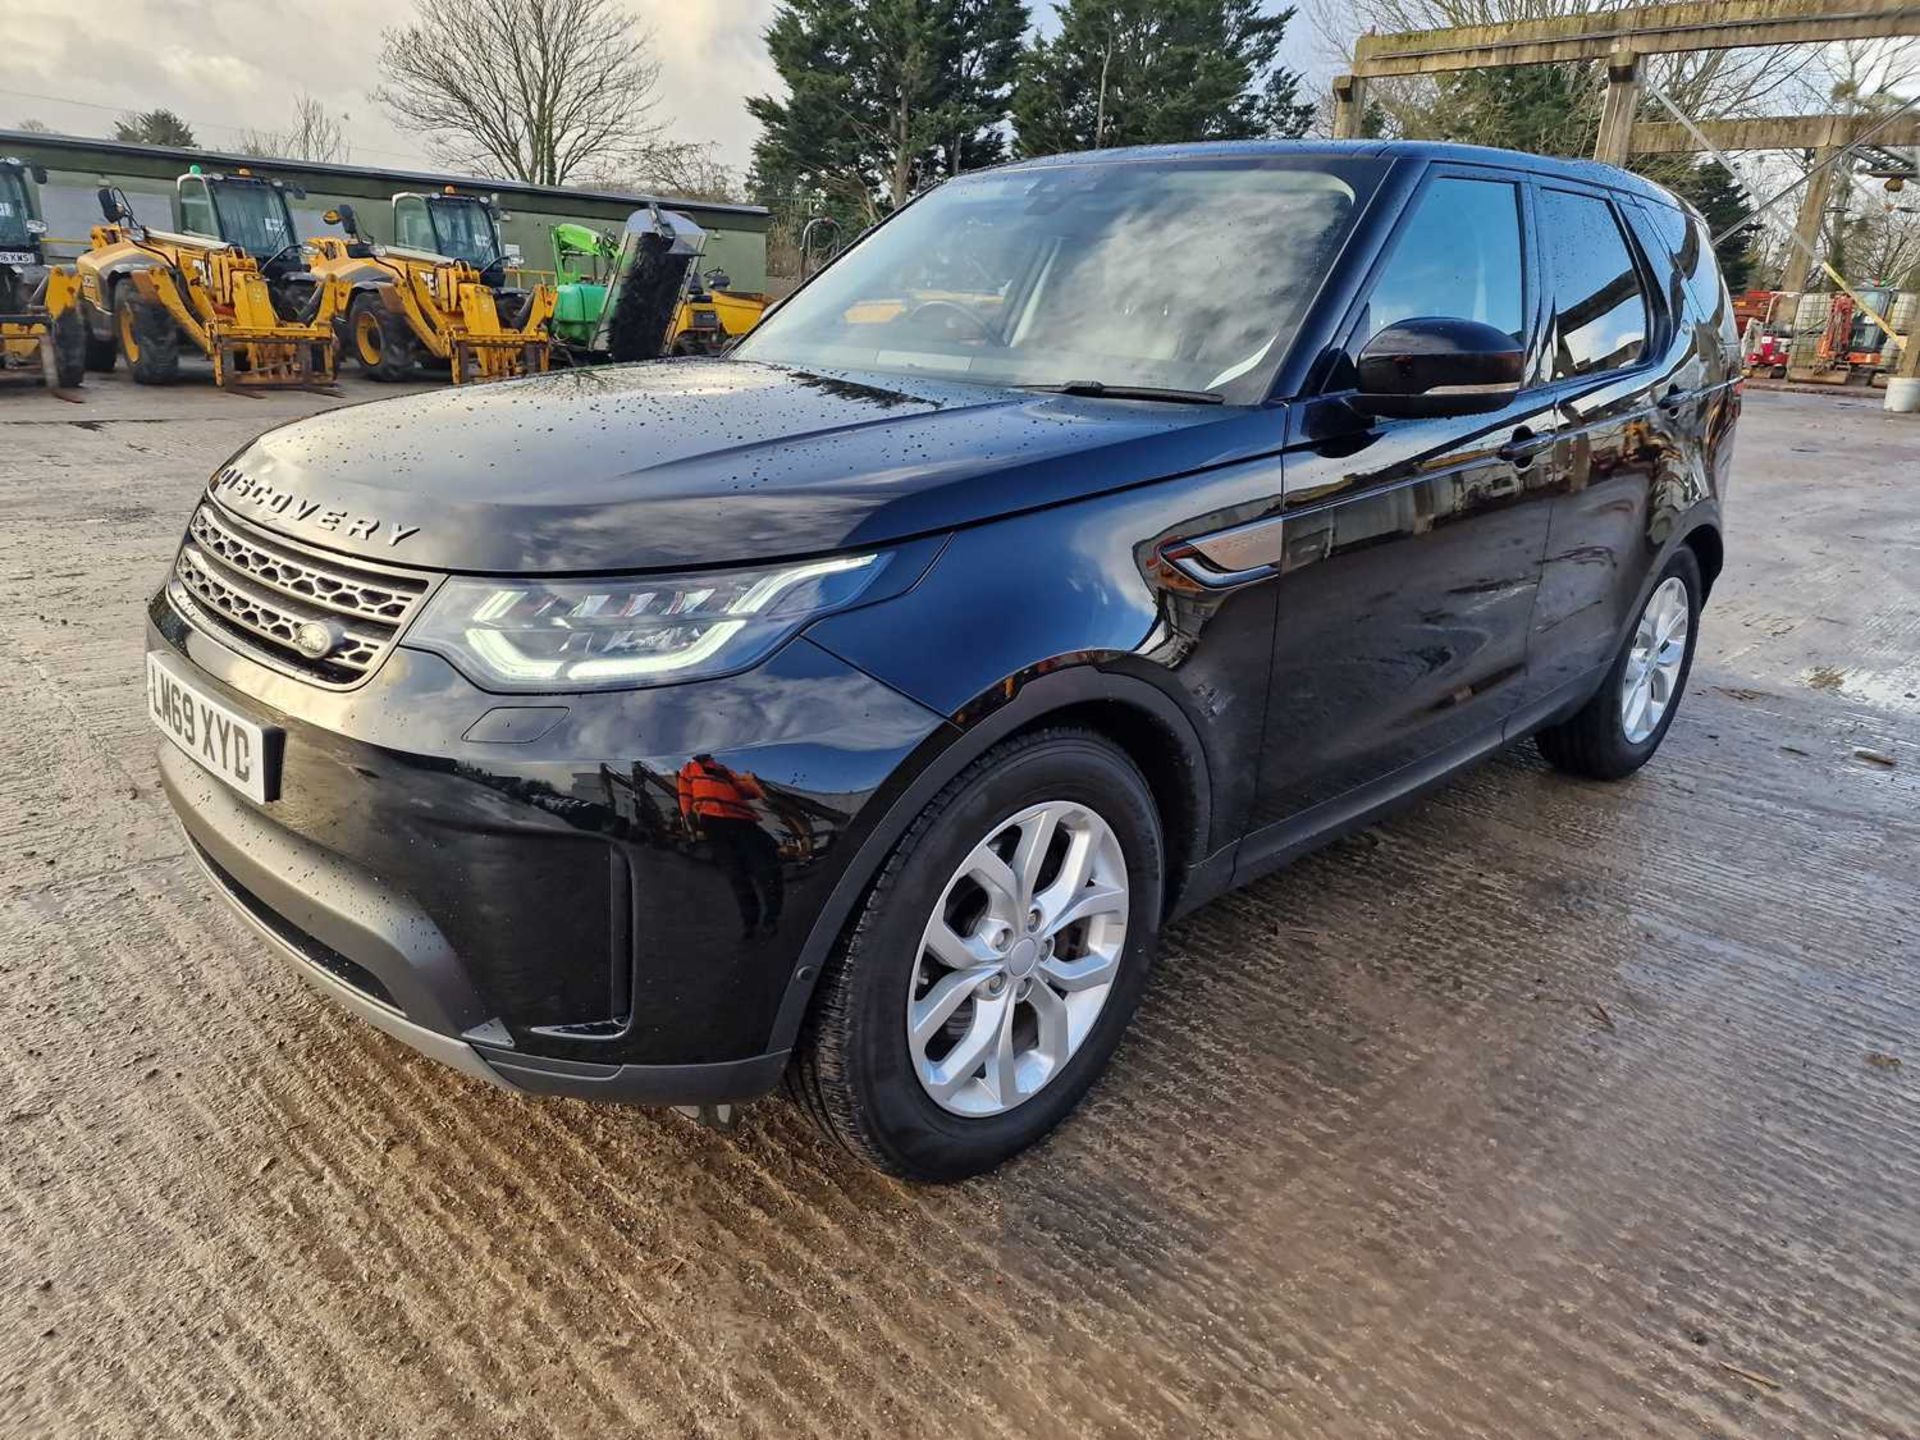 2019 Landrover Discovery SD4 SE 240 Commercial, Auto, Paddle Shift, Sat Nav, Reverse Camera, Parking